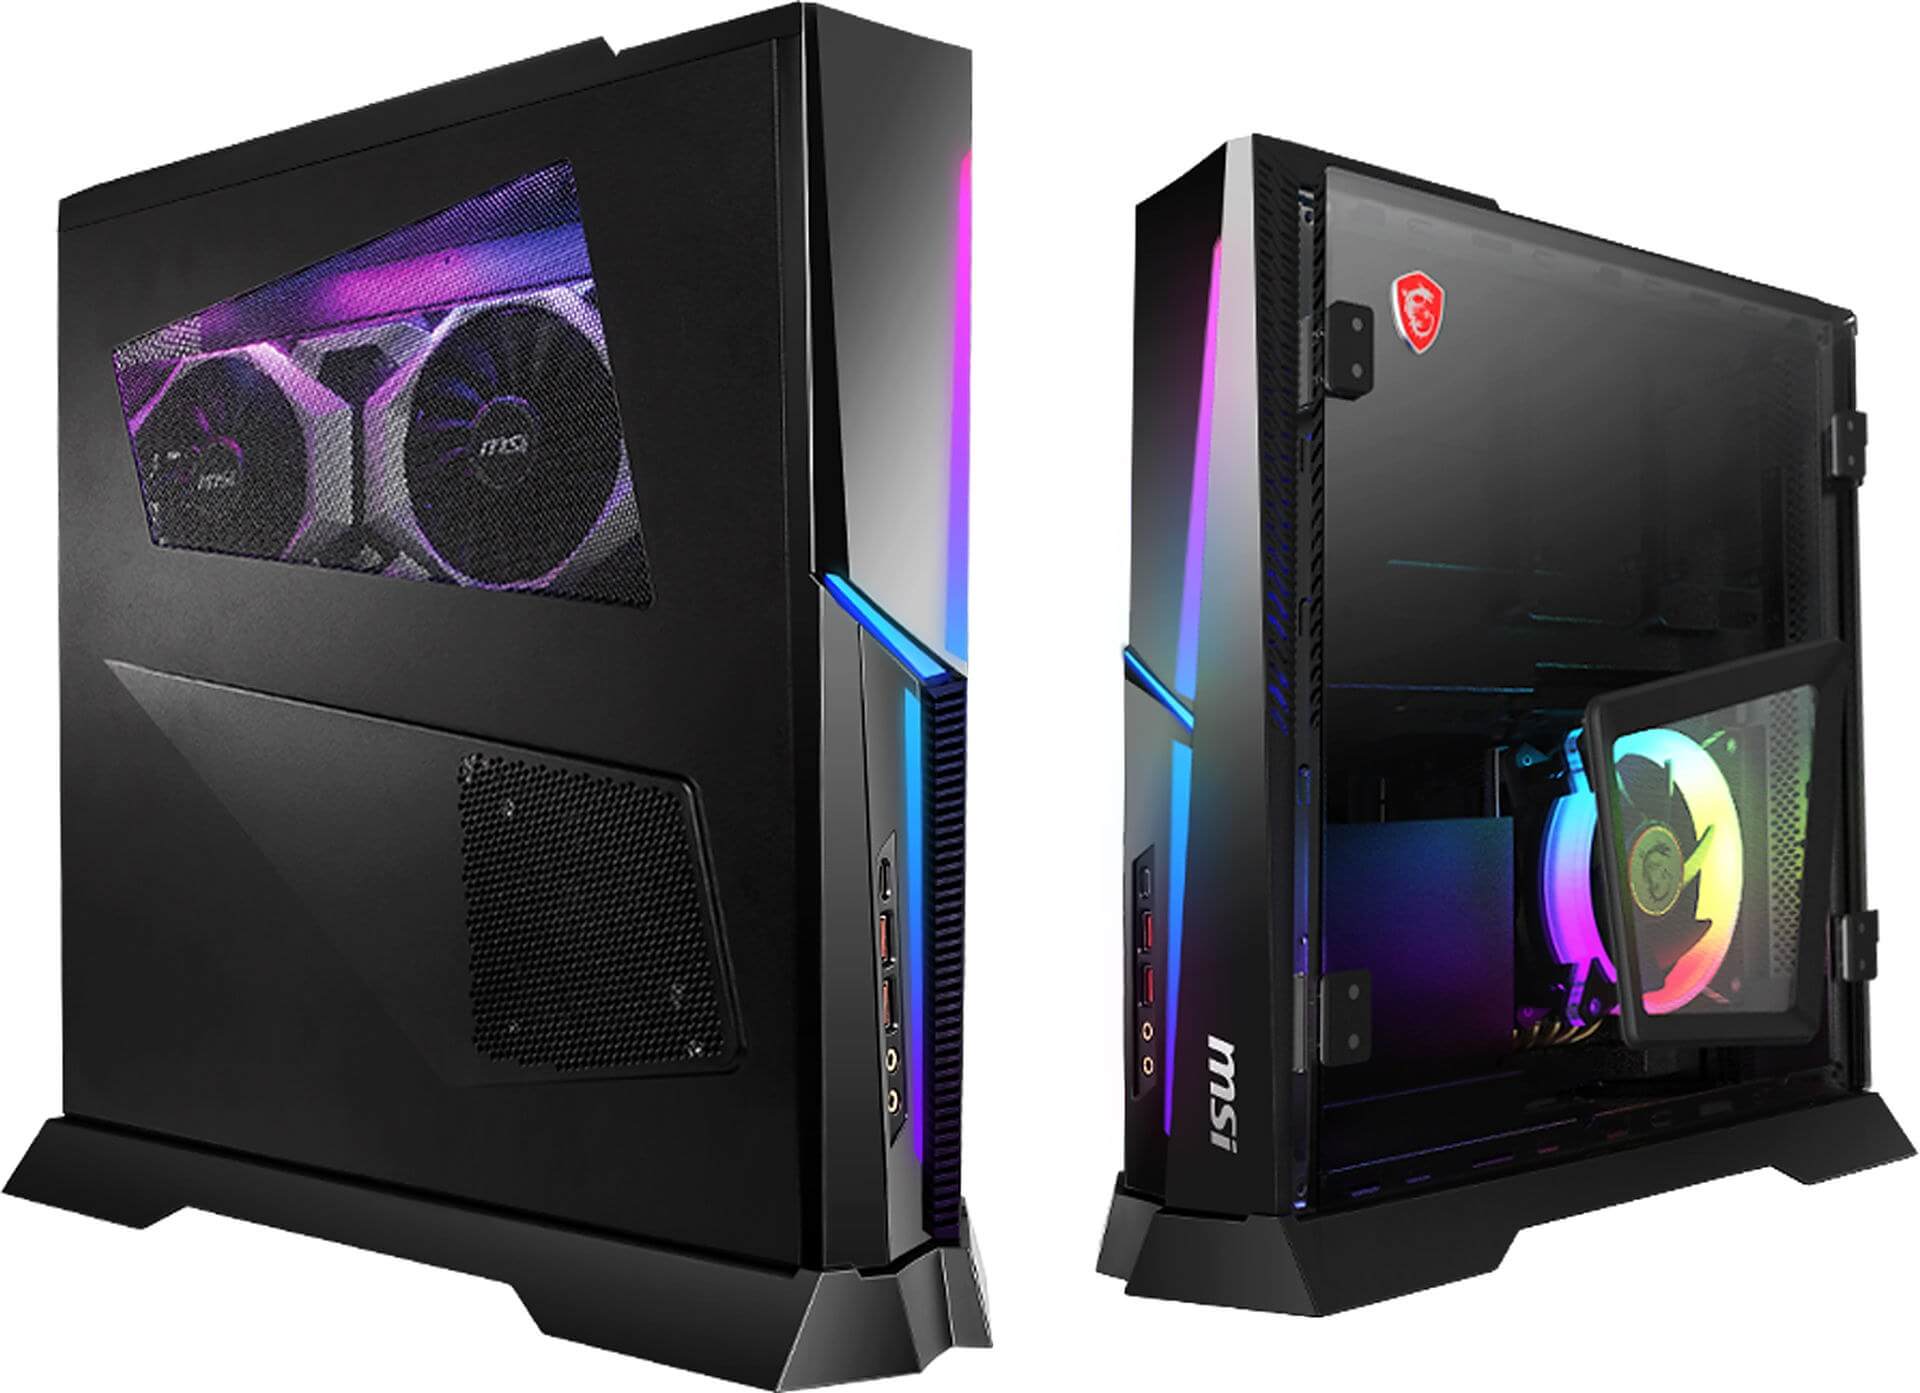 MSI's Trident X packs a Core i9-9900K, RTX 2080 Ti into a small form-factor PC